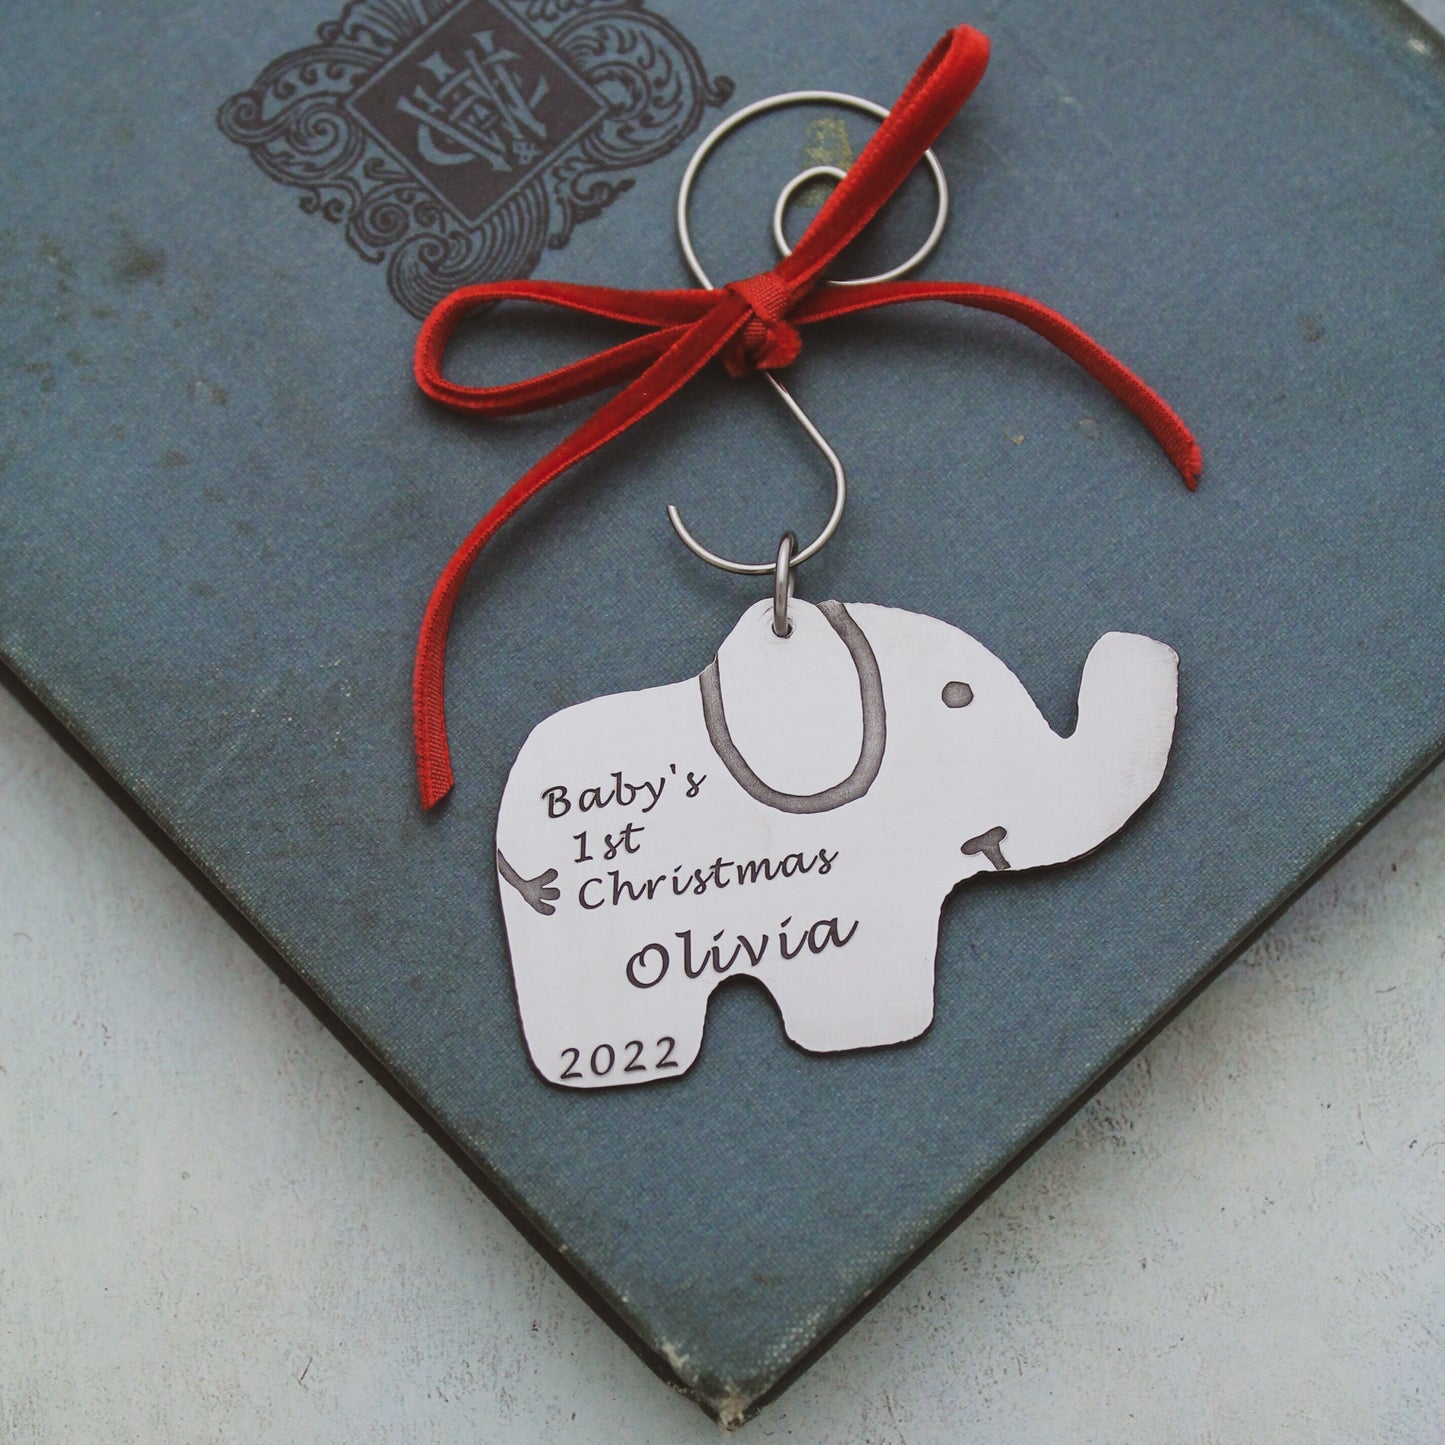 Personalized Baby's First Christmas Ornament, Elephant Christmas Ornament, New Baby Gift, Baby Gift, Personalized Hand Stamped Aluminum